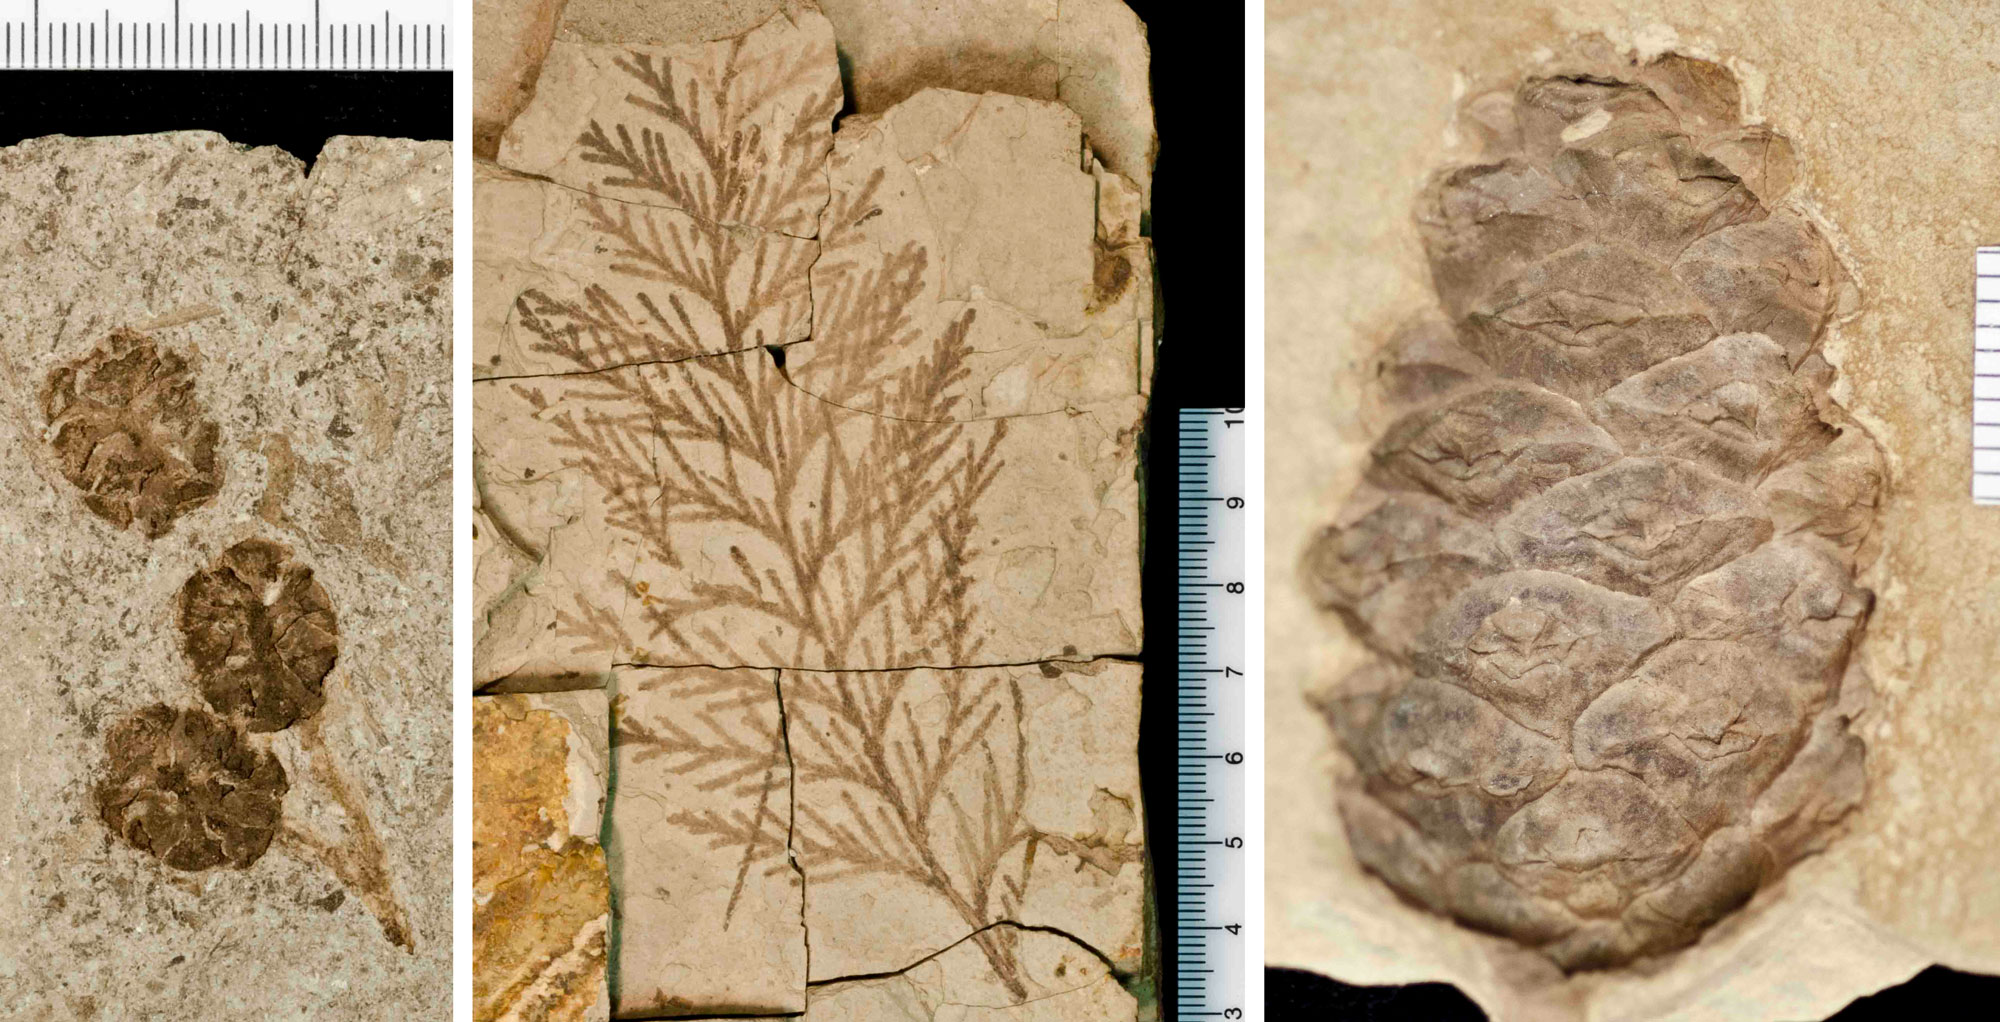 3-panel image of fossil conifers from the Eocene Florissant flora of Colorado. Panel 1: Photo of a small branch bearing three redwood seed cones. the cones are oval in shape and the cone scales have spread apart. Panel 2: Photo of a delicate branch of a cedar with scale-like leaves. Panel 3: Photo of a fossil pine seed cone showing tightly closed cone scales.